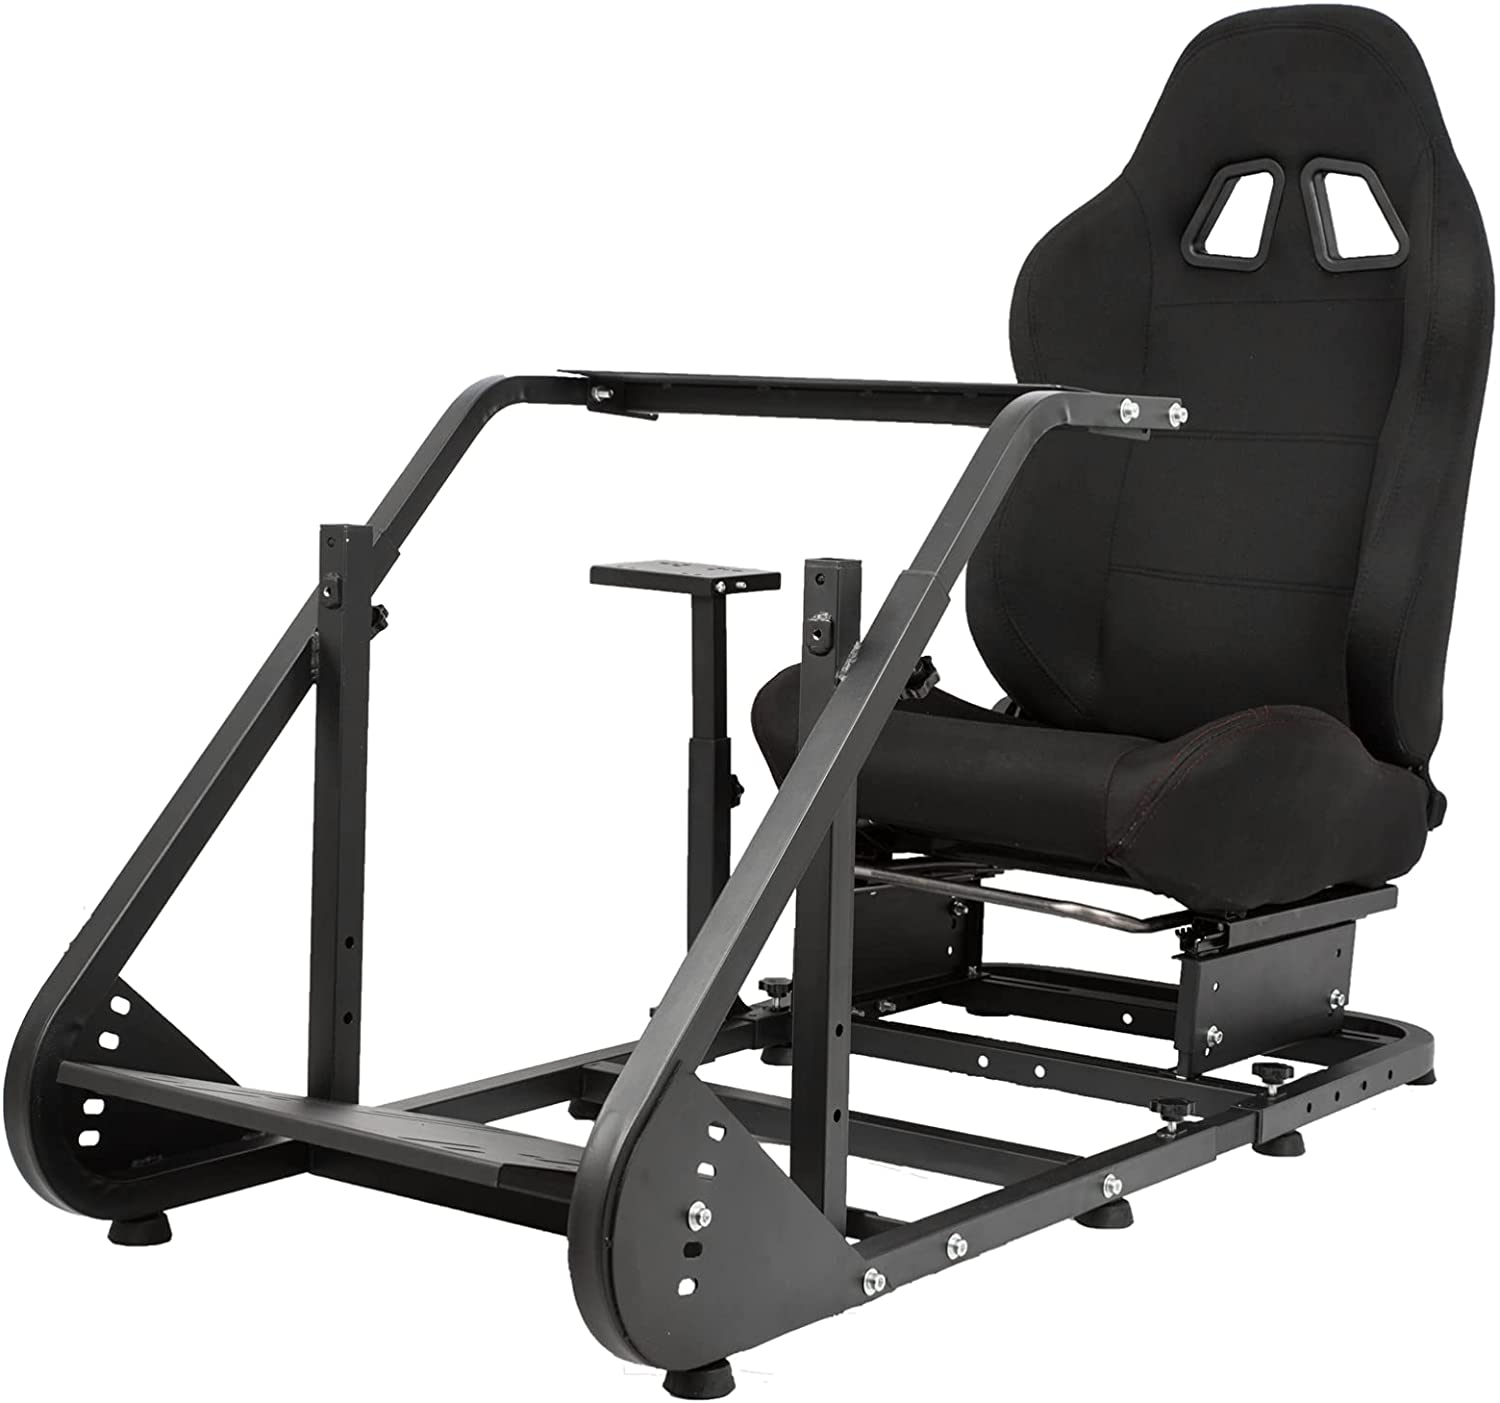 Minneer™ Driving Simulator Cockpit Frame with Black Seat Compatible with G25 G27 G29 G920